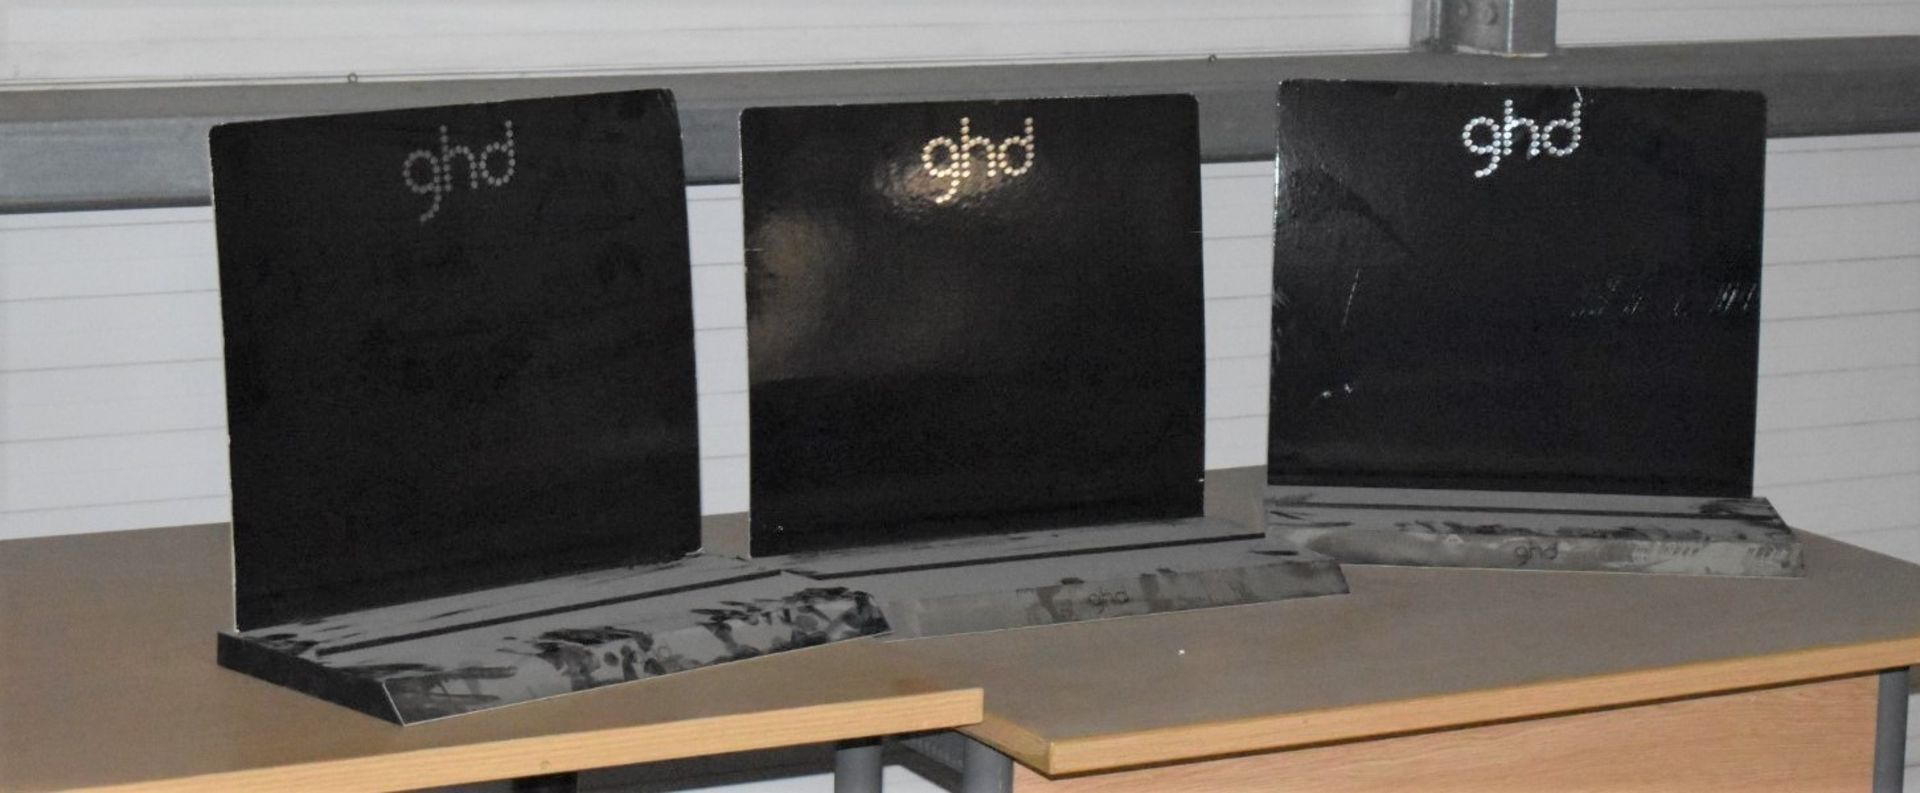 3 x GHD Hair Straightener Display Stands - CL480 - Location: Nottingham NG15 SHORT NOTICE SALE! This